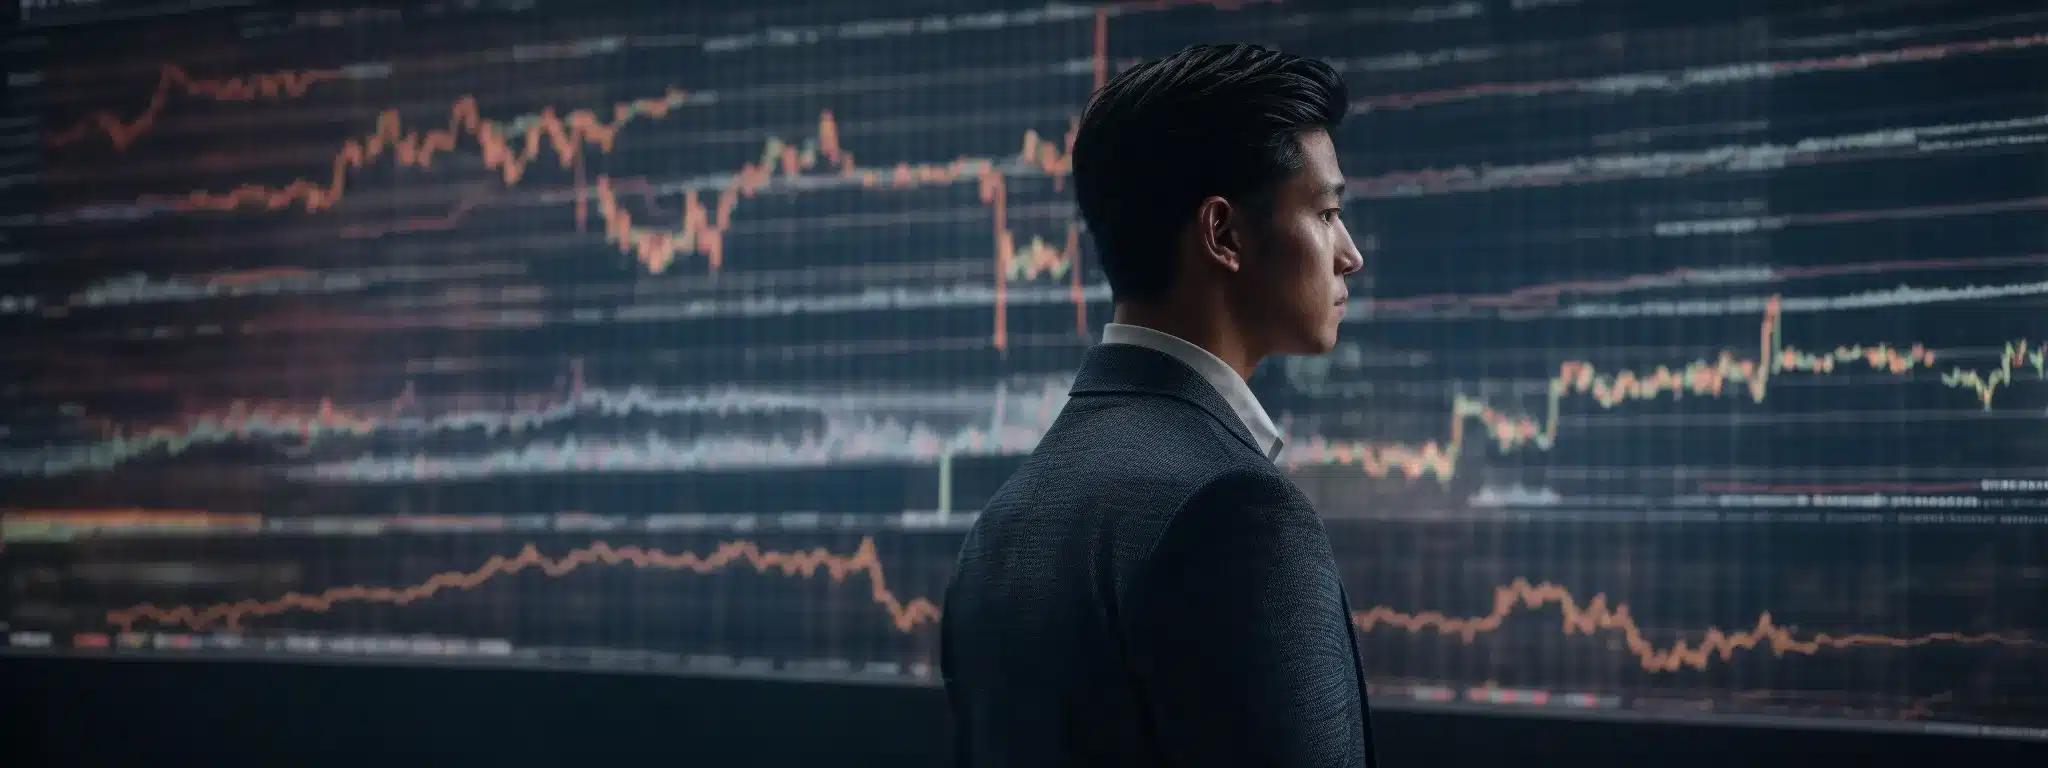 A Strategist Stands In Front Of A Vast Interactive Market Data Display, Intently Navigating Through Real-Time Analytics Streams.